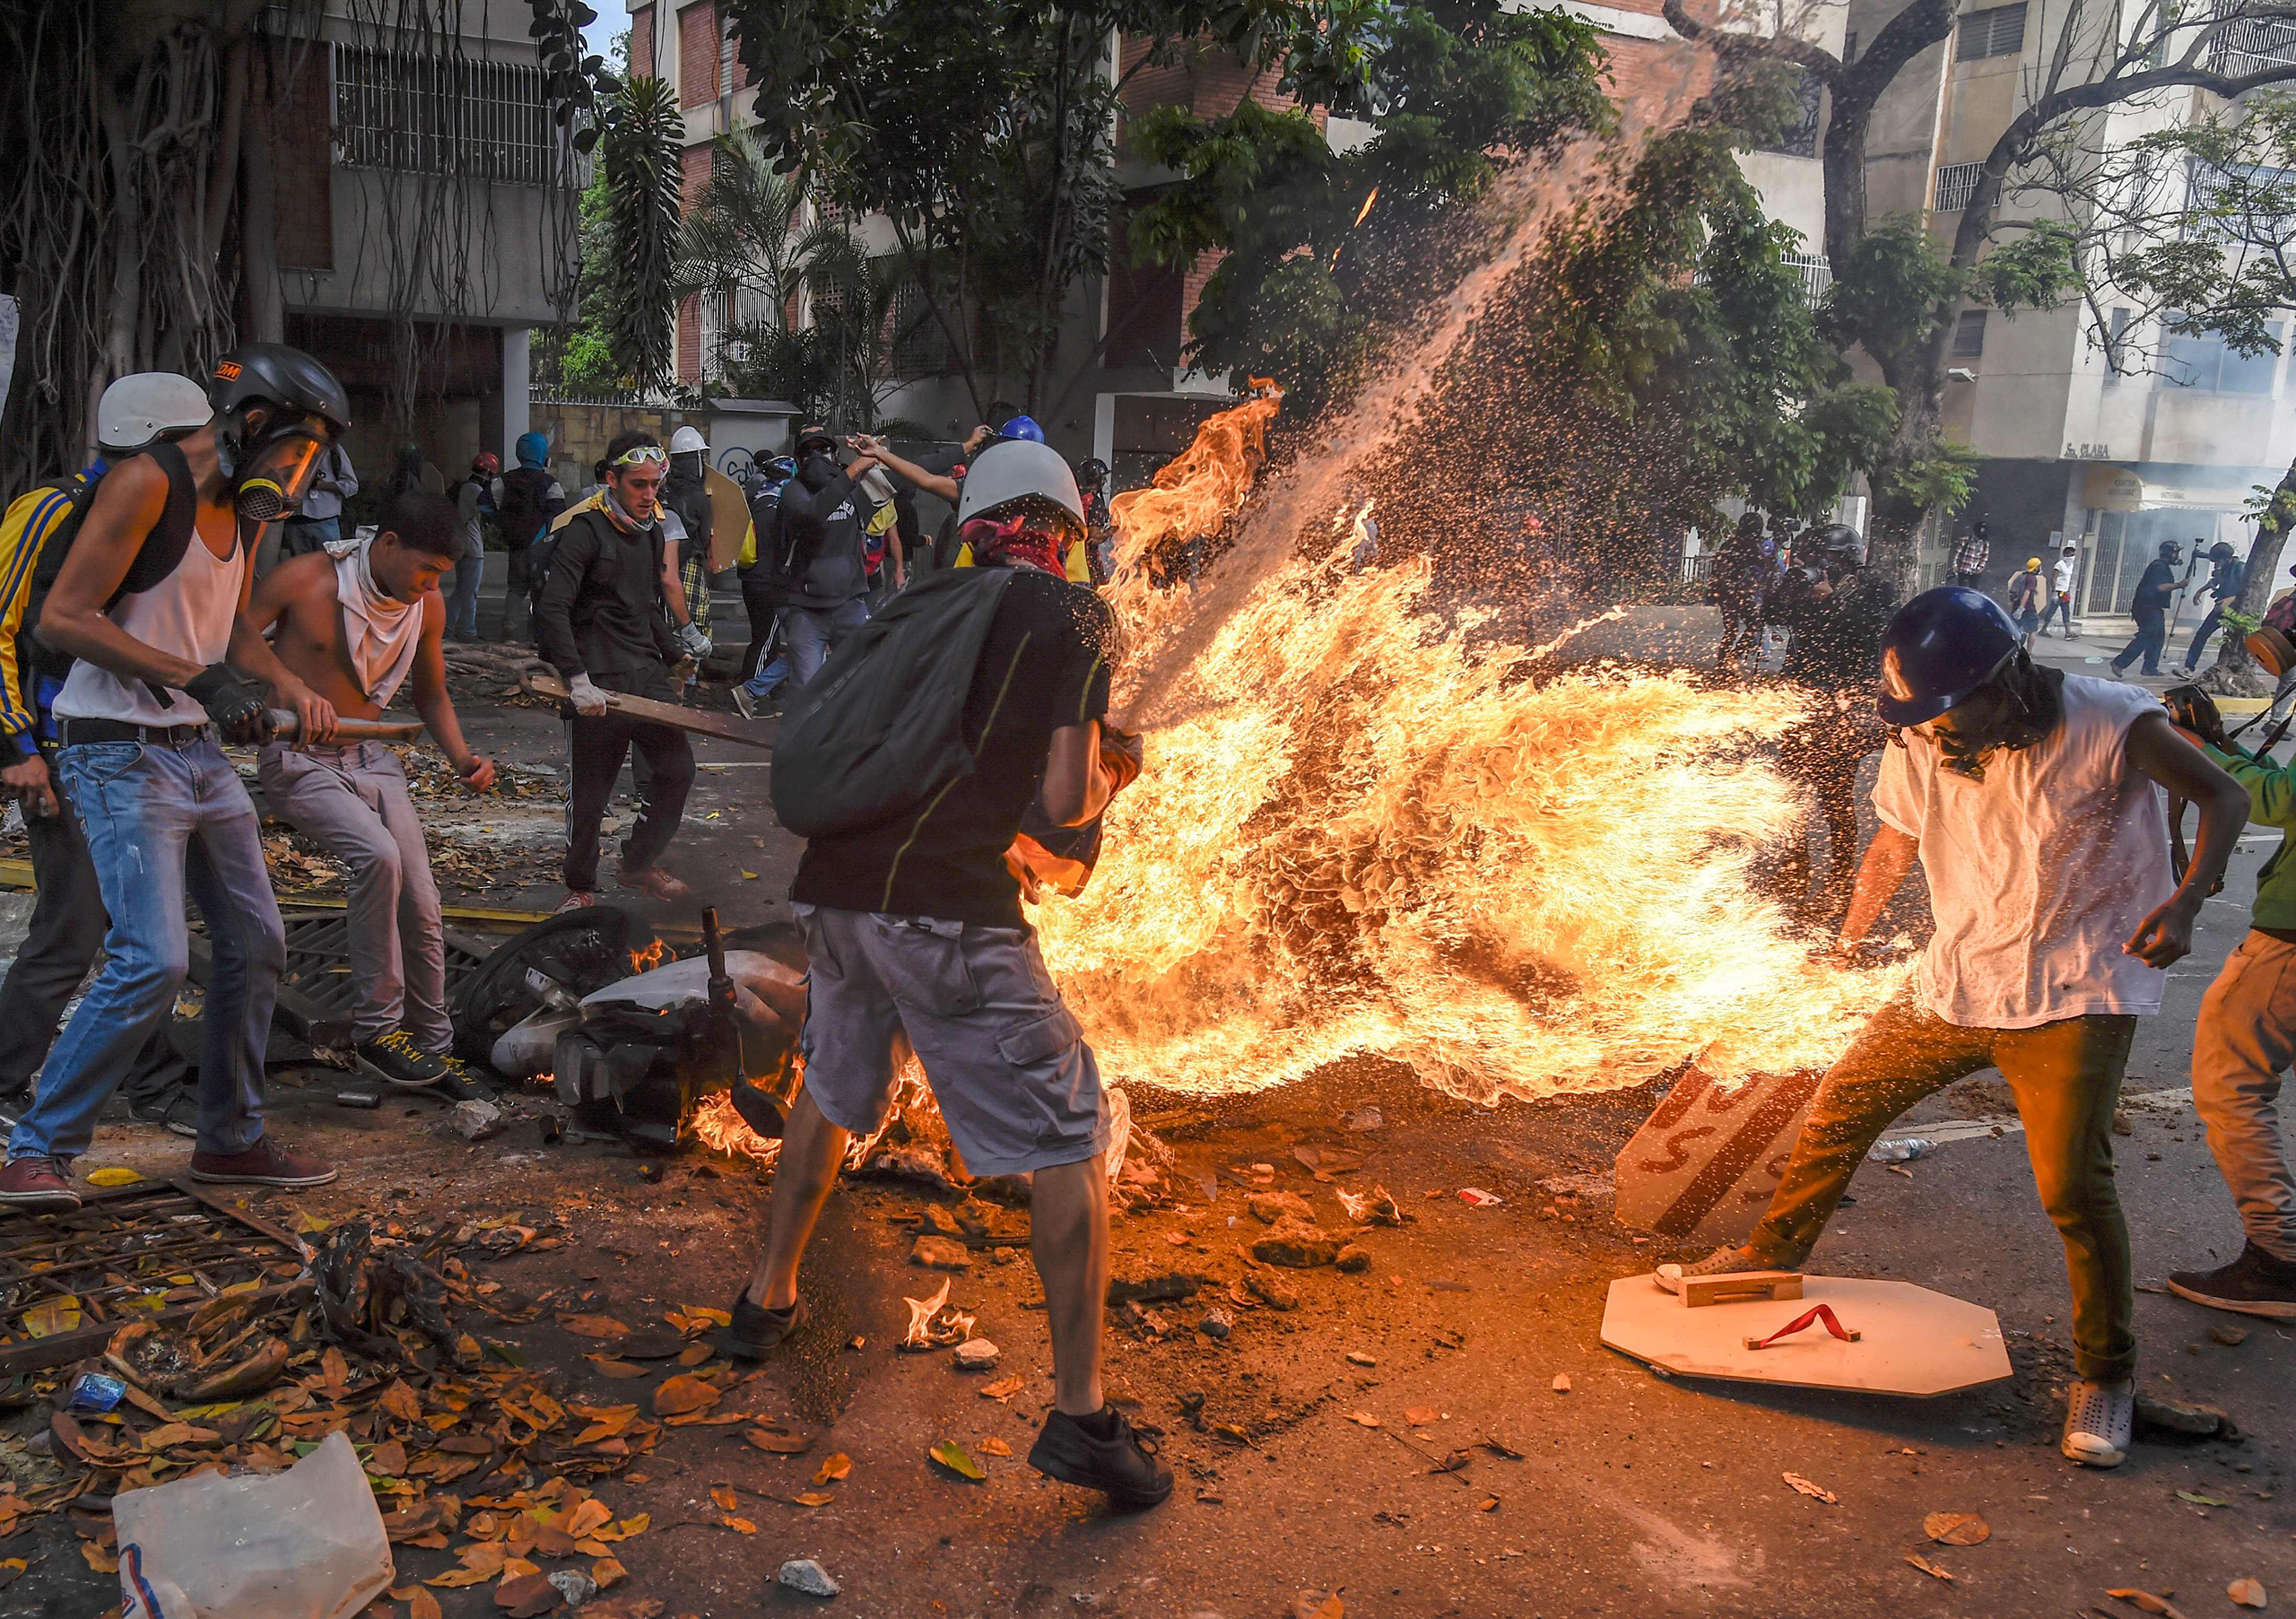 The gas tank of a police motorbike explodes during a protest in Caracas on May 3, 2017.